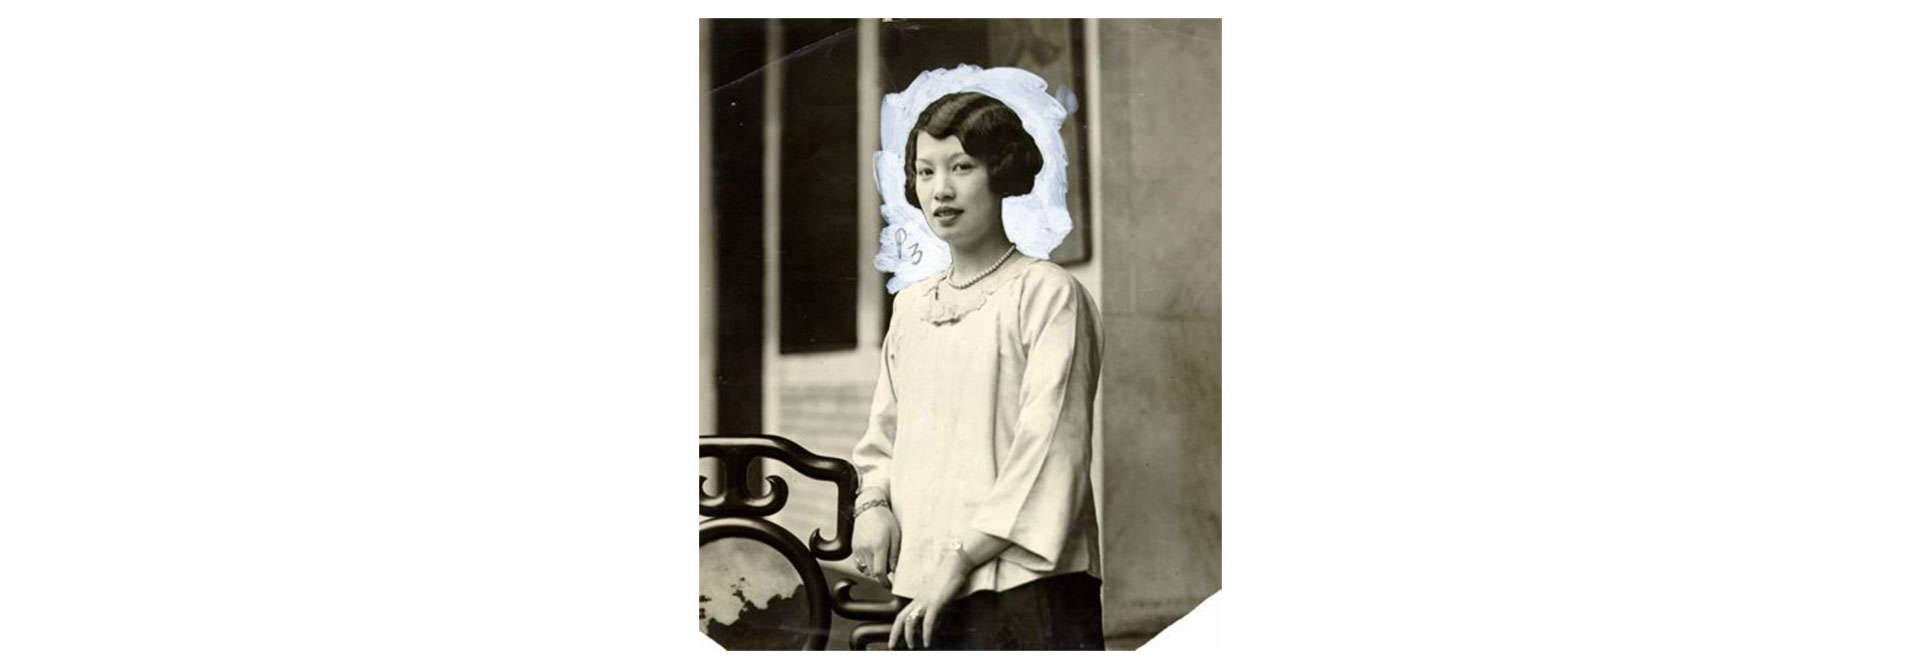 Black and white posed photo of a neatly put together 1920s Asian woman. She has a wave in her hair and is wearing a long sleeved white shirt.